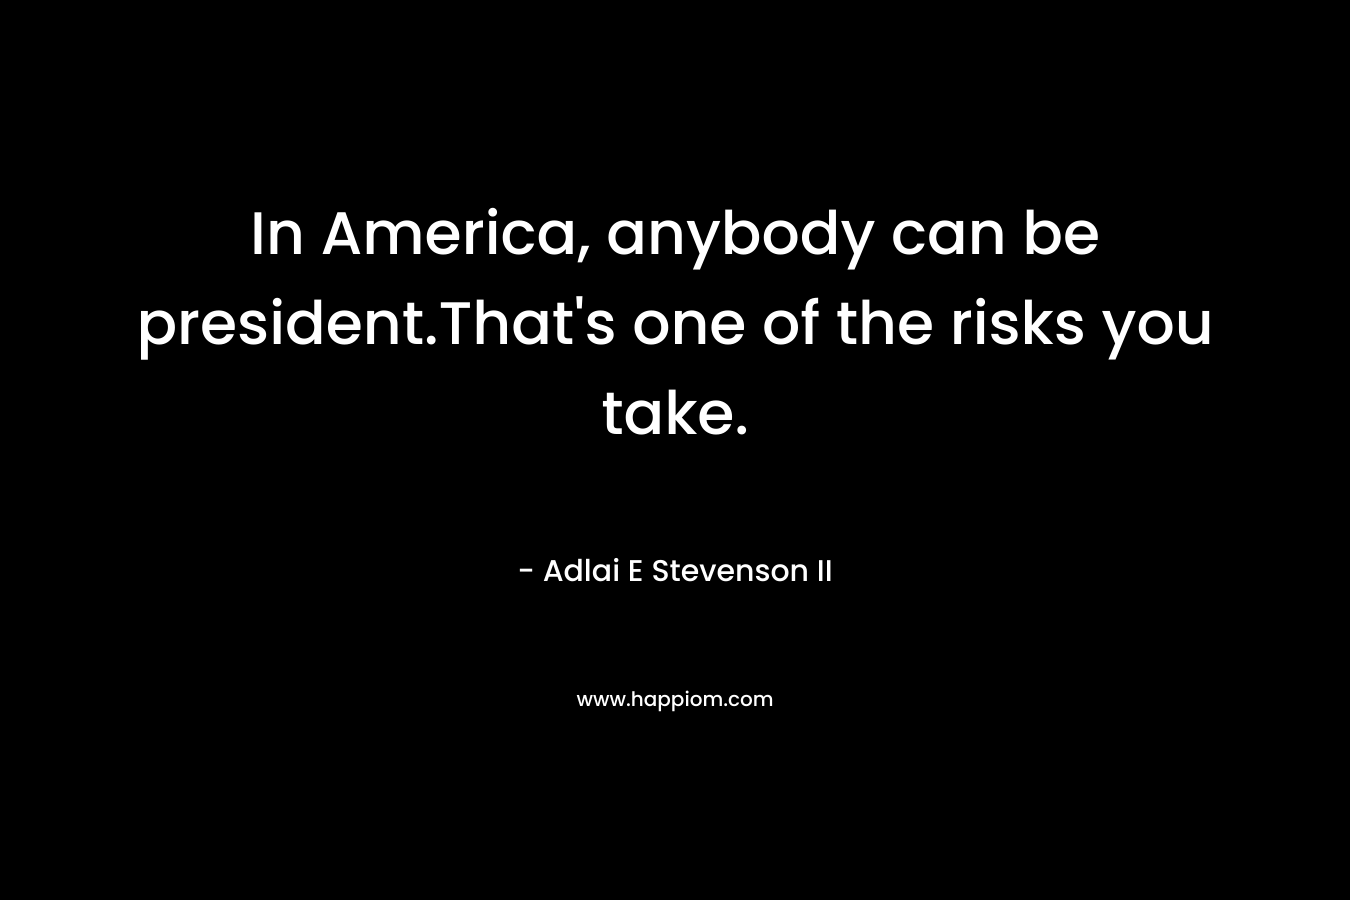 In America, anybody can be president.That's one of the risks you take.